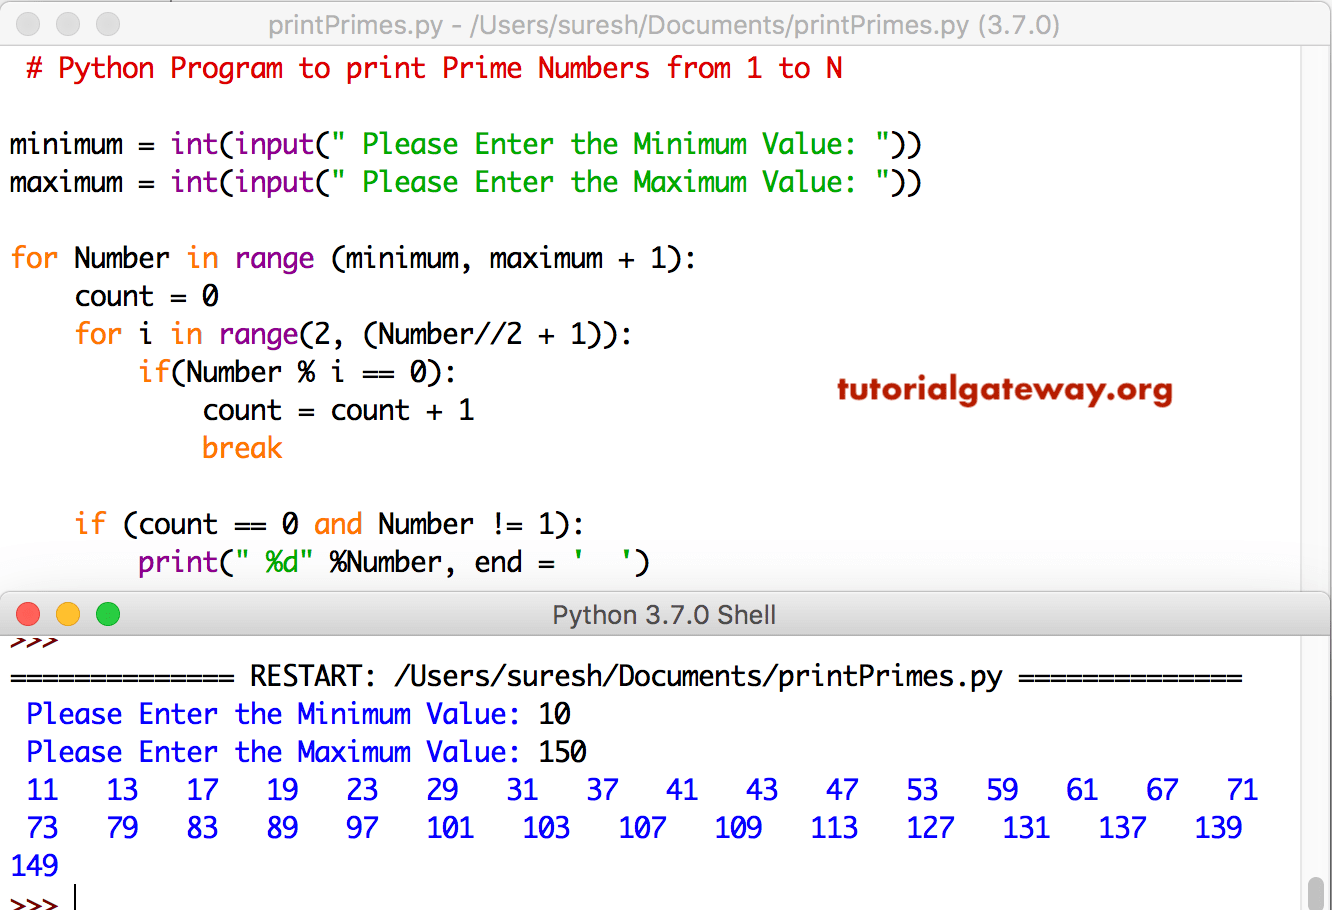 Python Program to print Prime Numbers from 1 to 100 3